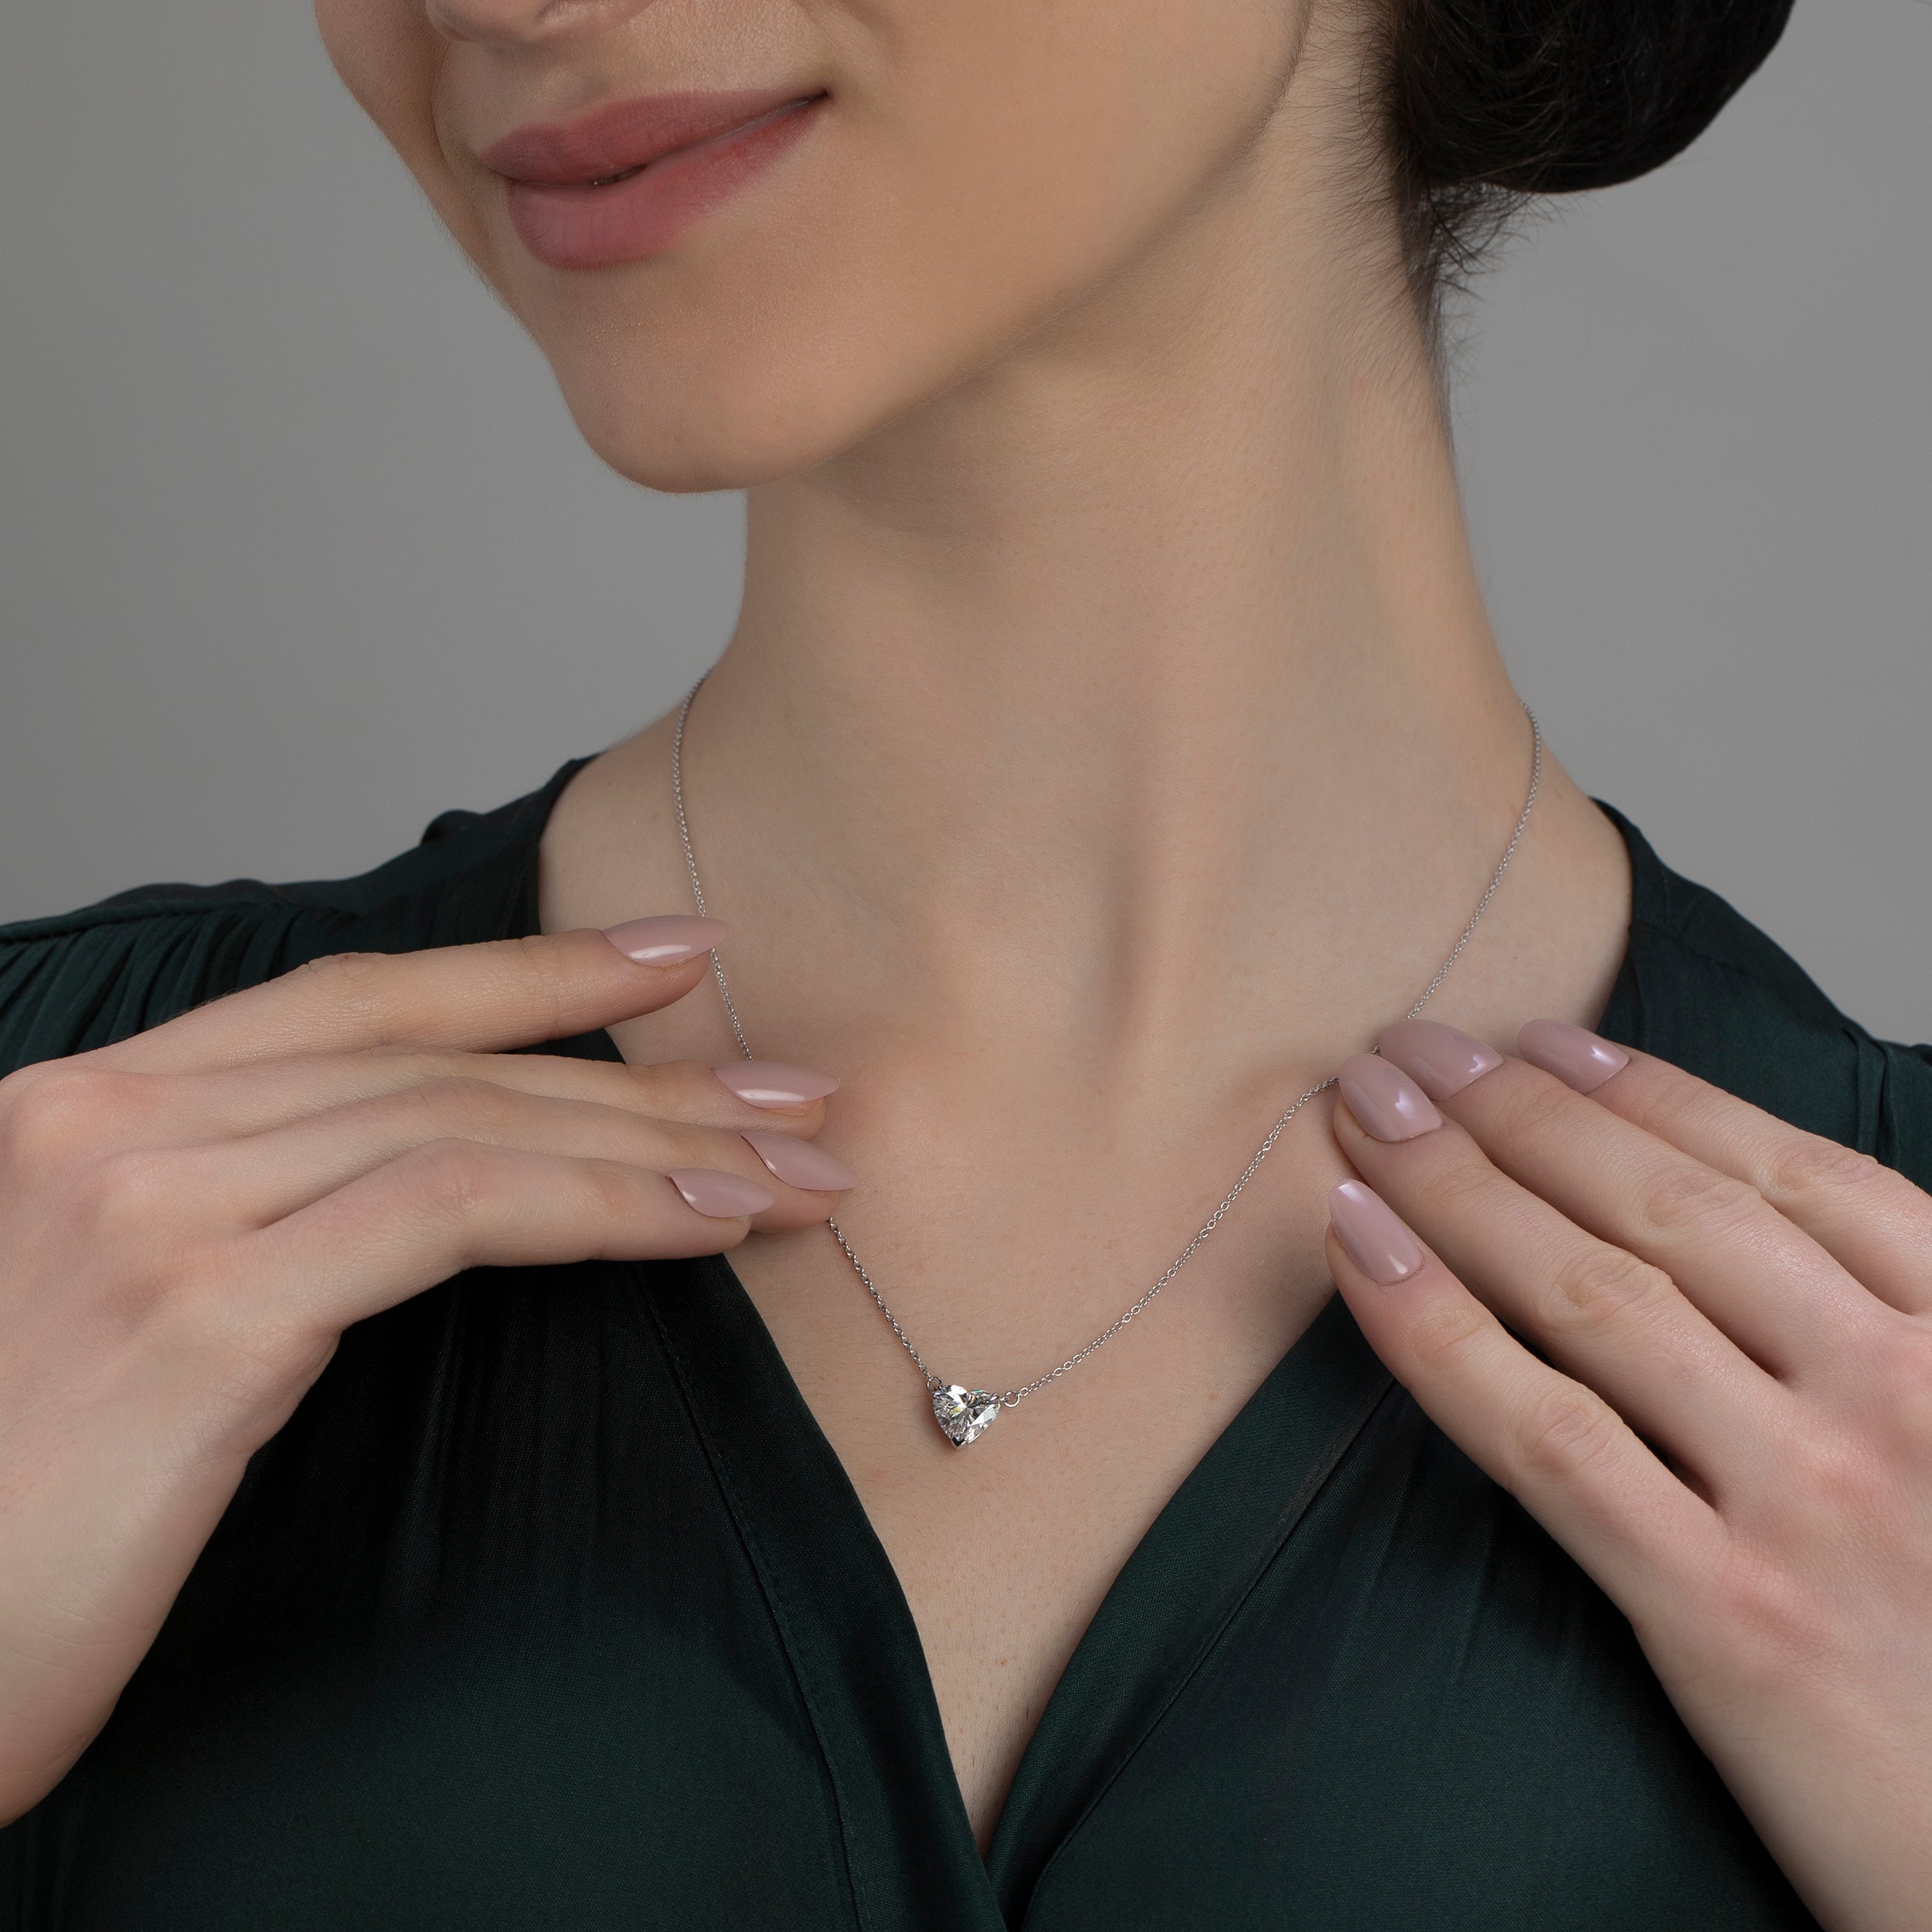 Eternal Love: Heart-Shaped Lab Grown Diamond Solitaire Pendant in White Gold Chain | SKU : 0019787039